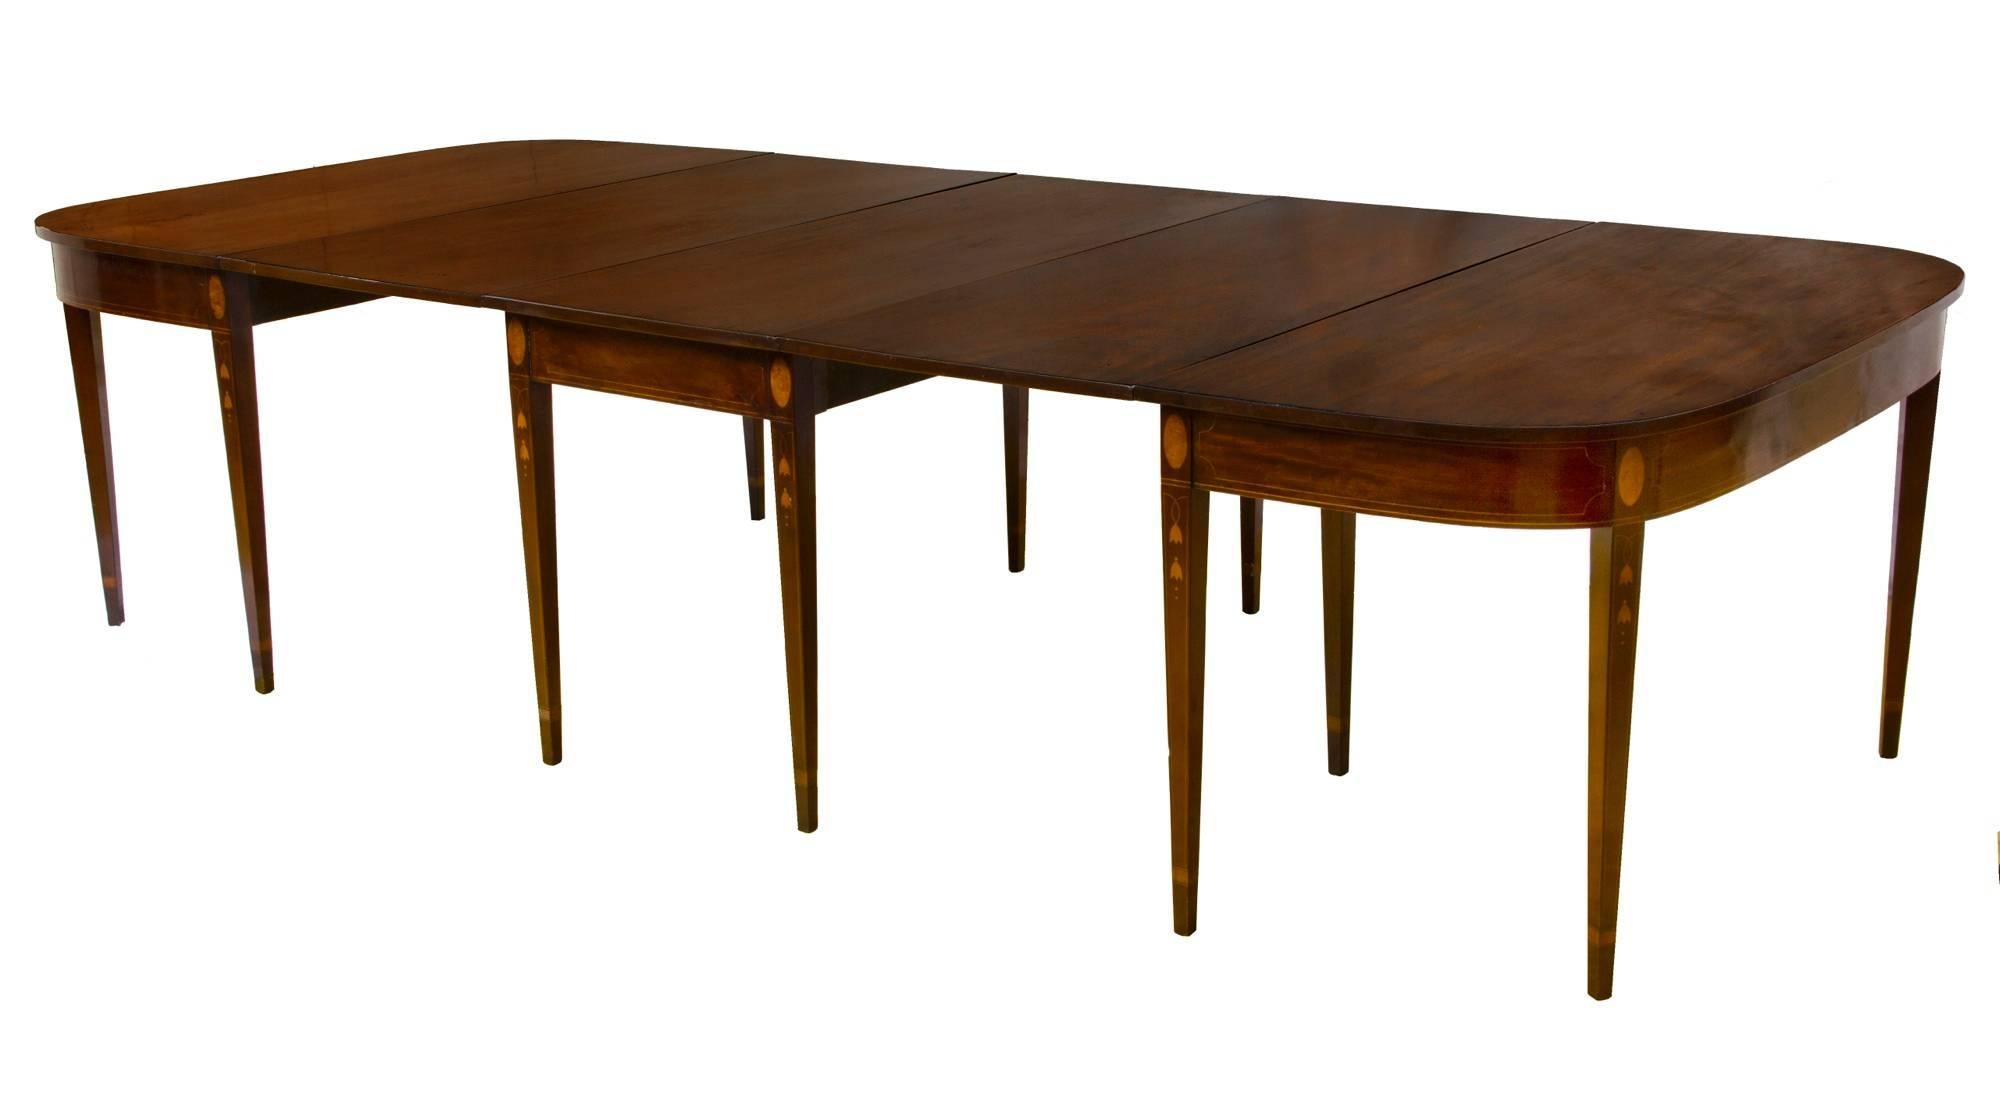 Grand Federal/Hepplewhite Inlaid Mahogany Three-Part Dining Table, 1800-1820 For Sale 2